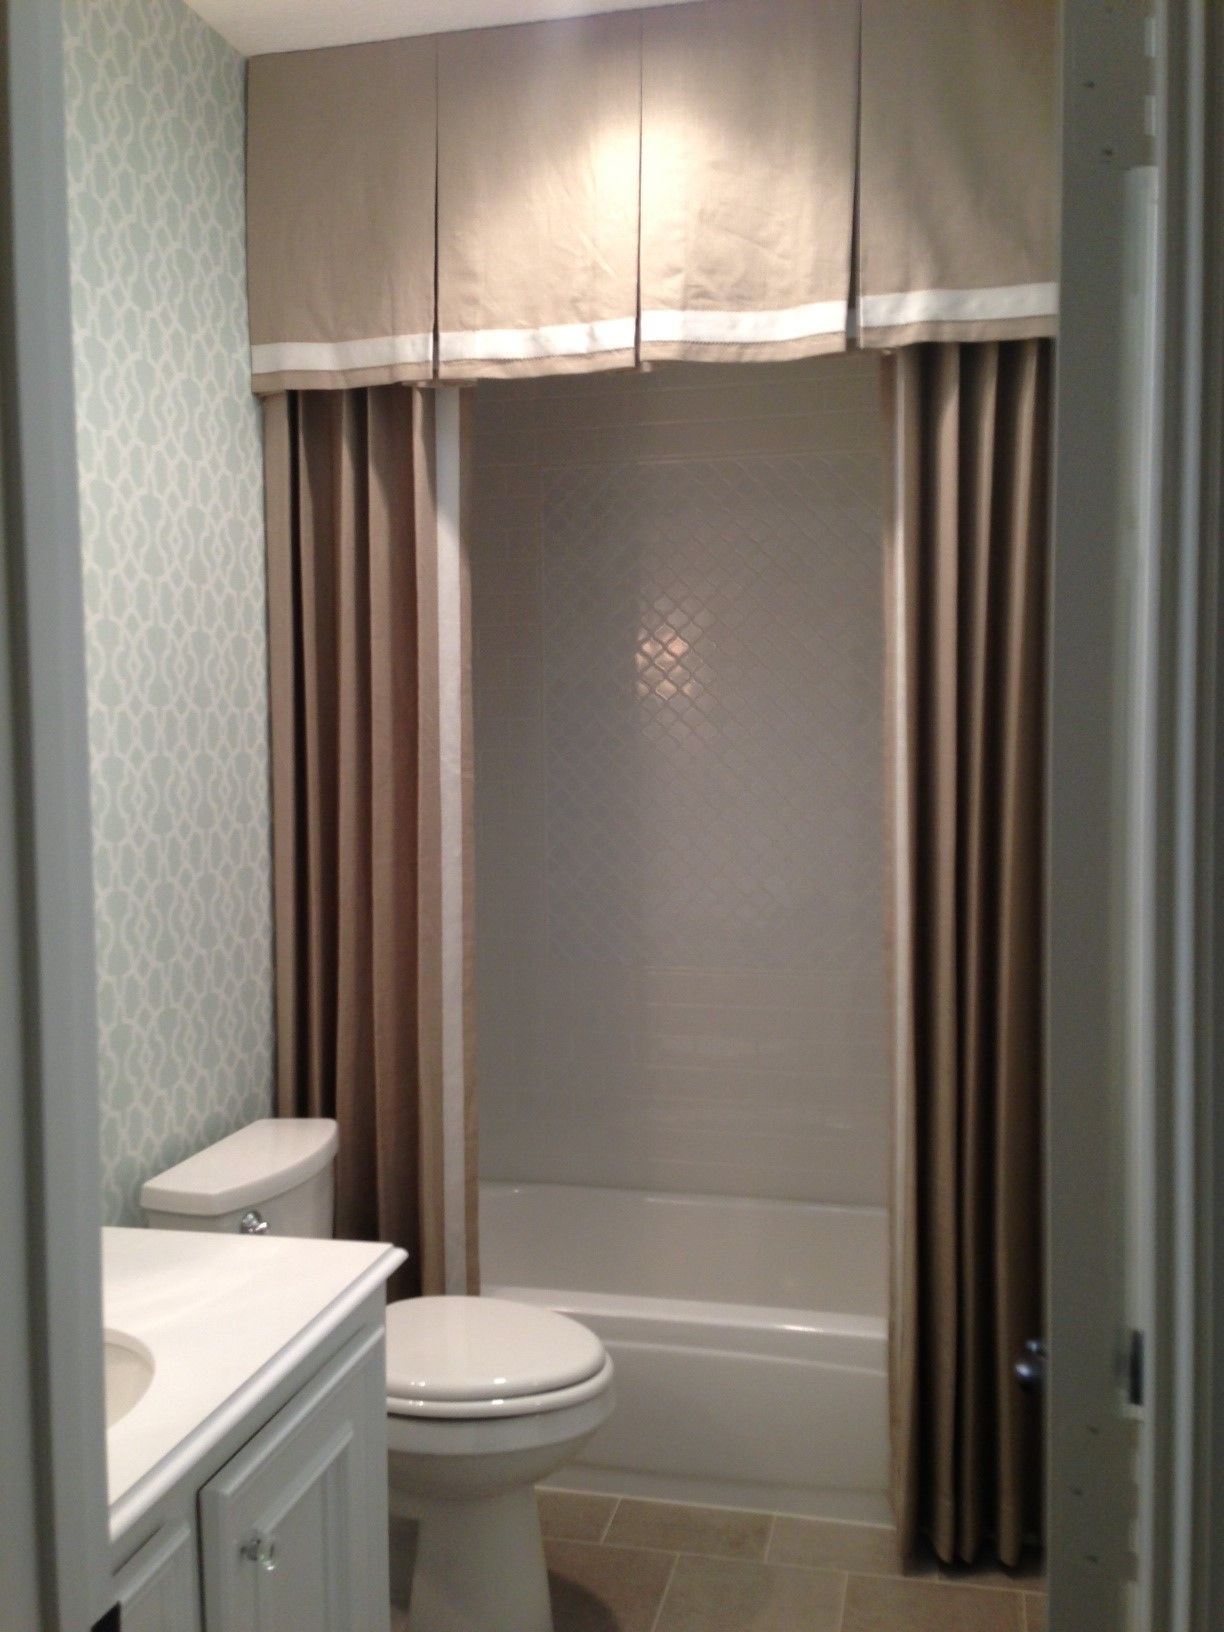 Beautiful shower curtain in a remodeled bath